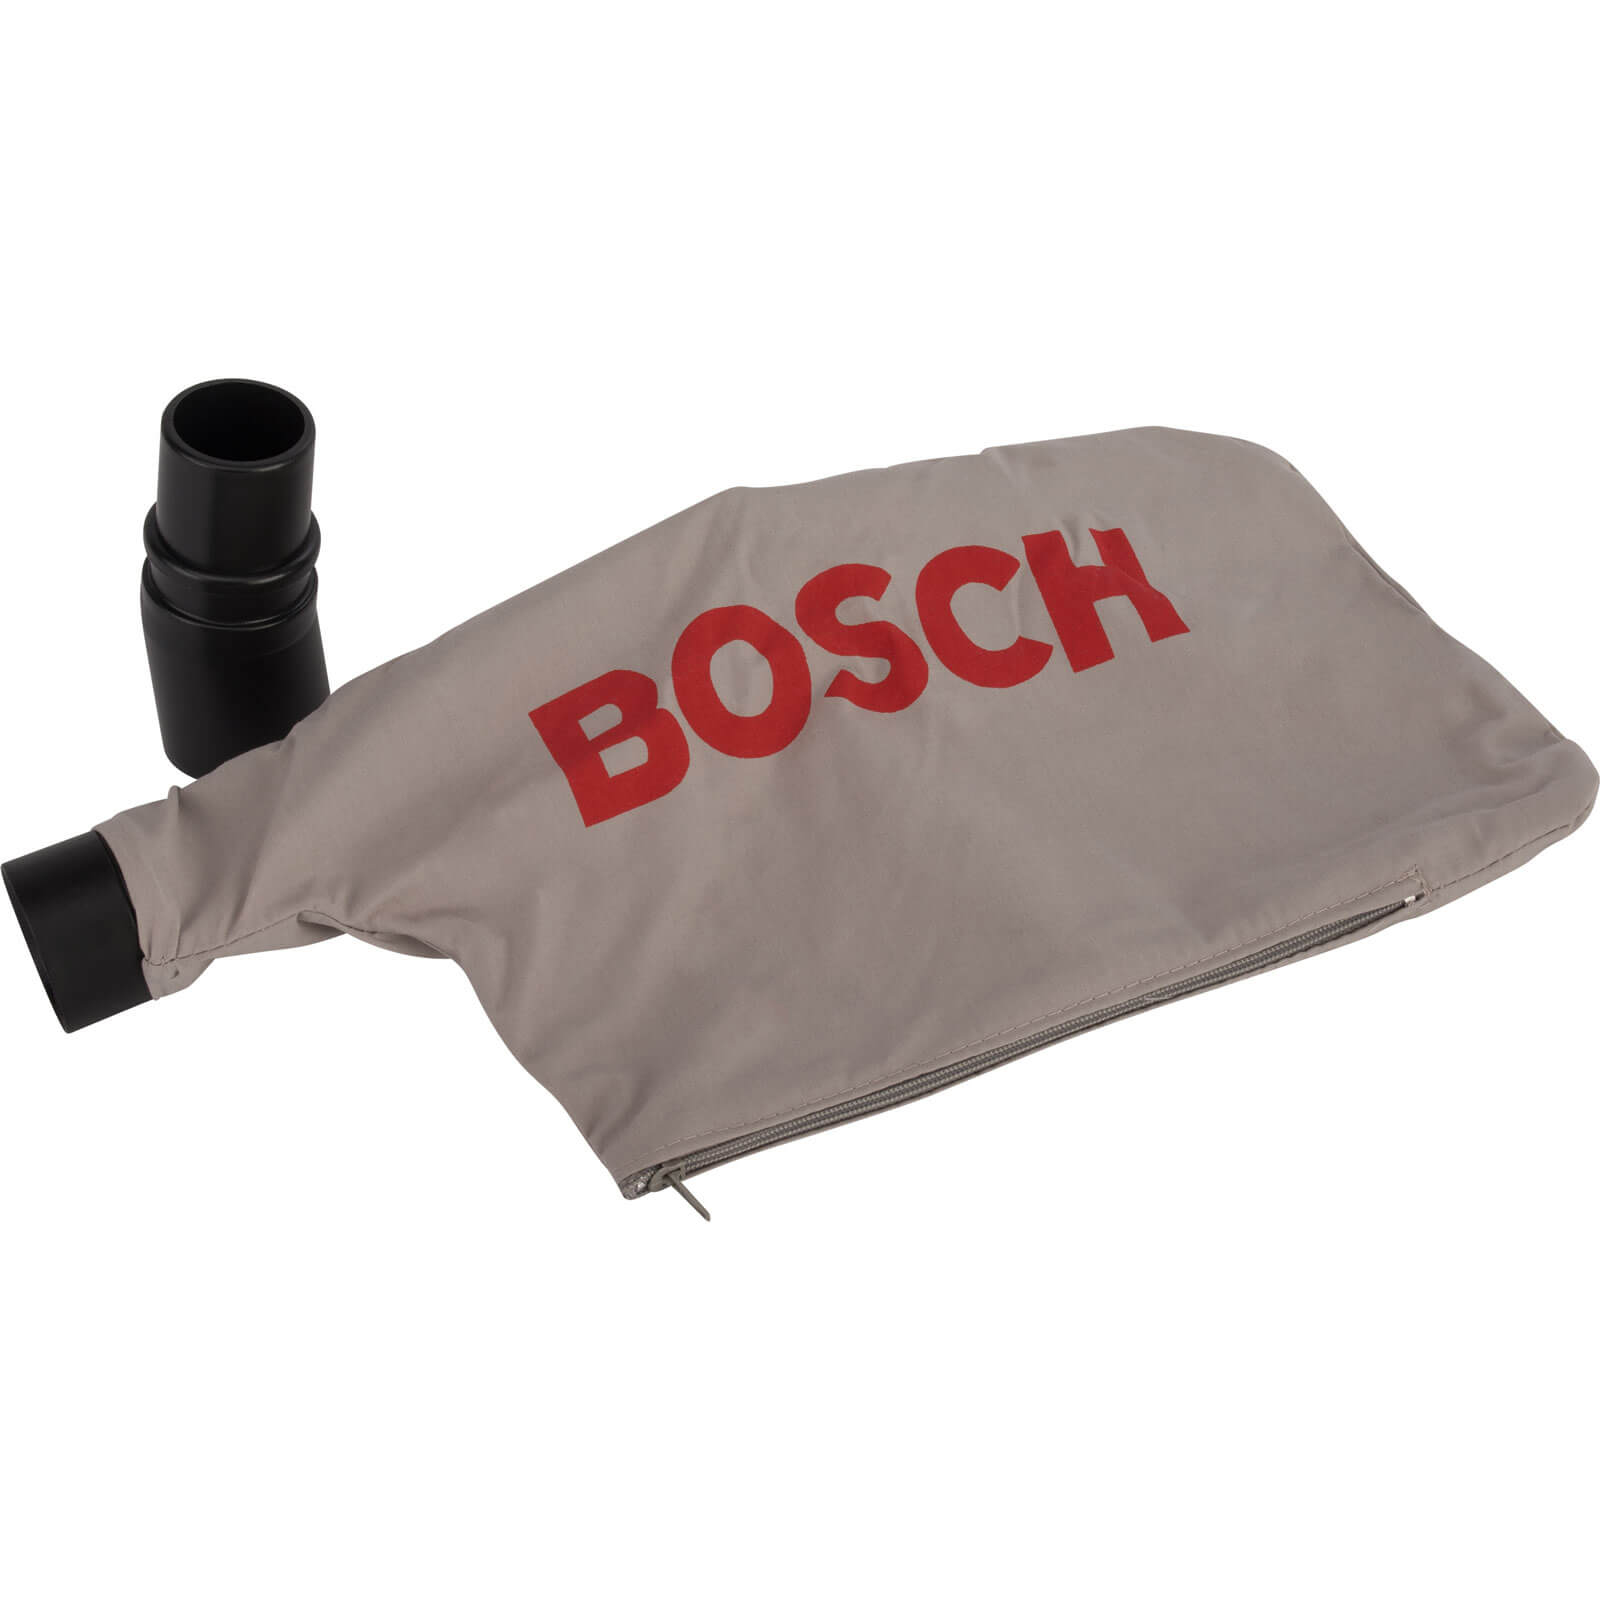 Image of Bosch Dust Bag and Adaptor for GCM 12 SD Mitre Saws